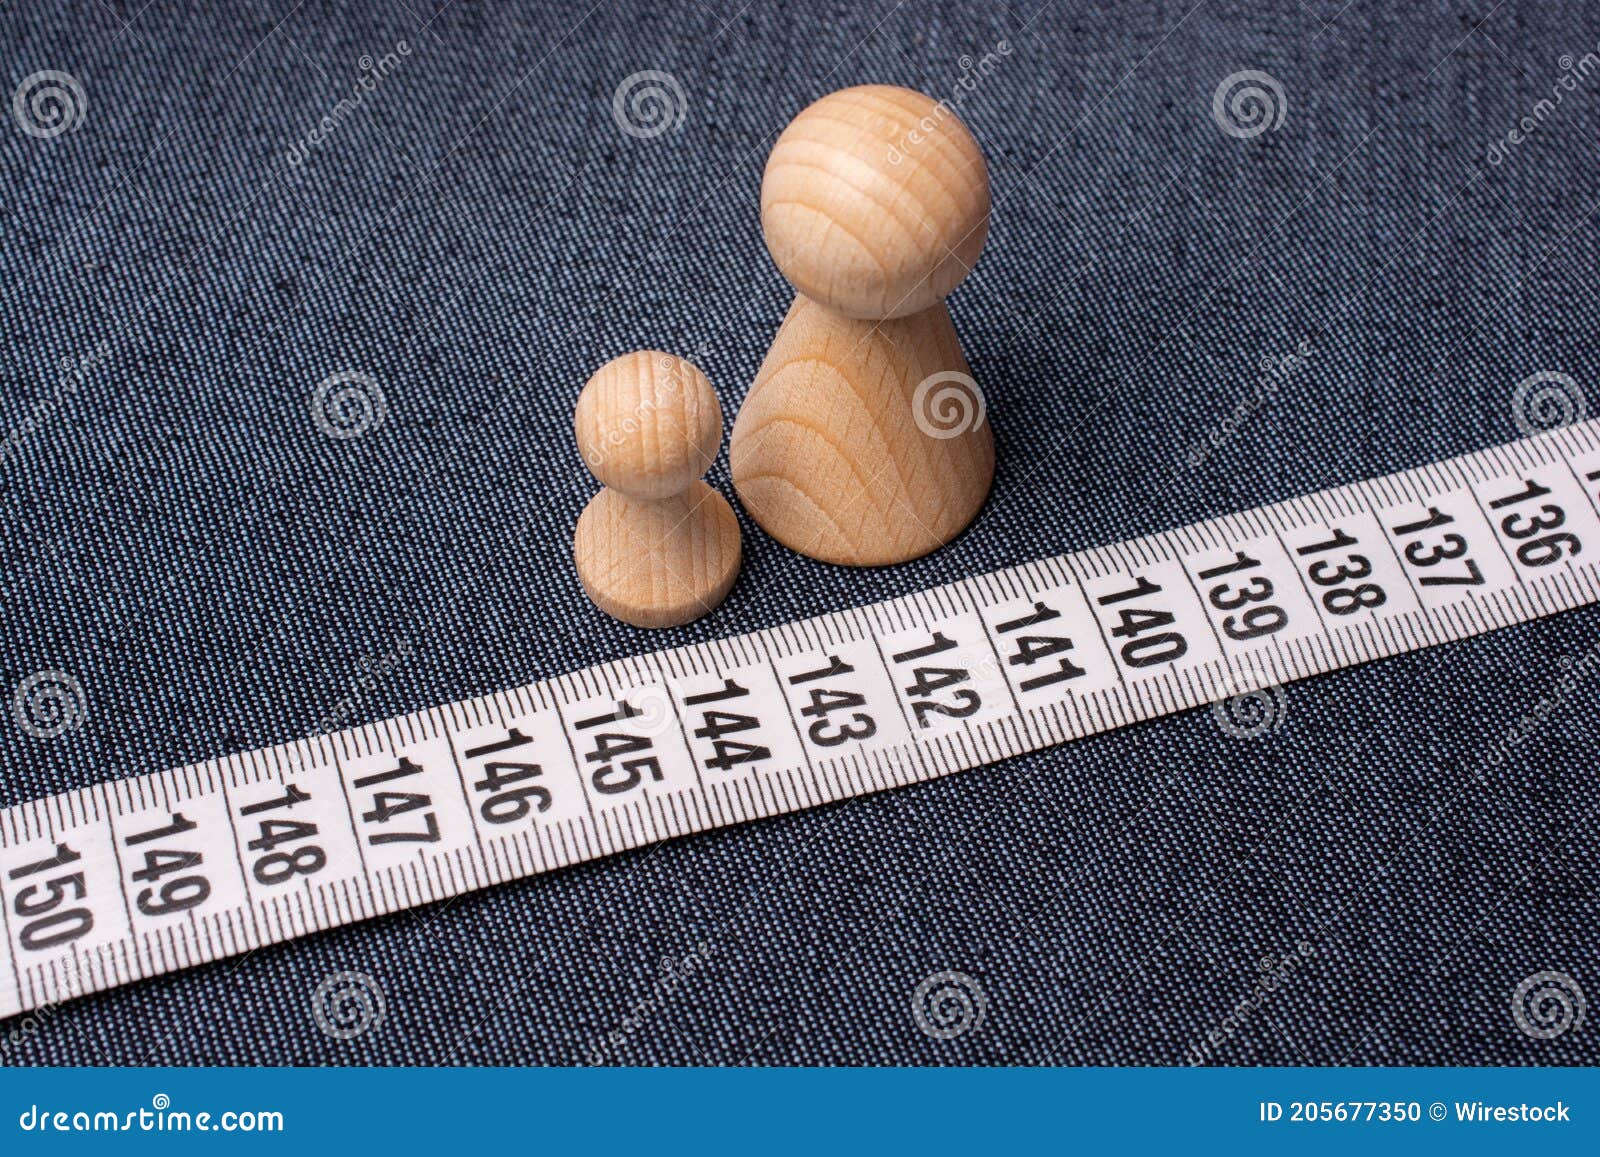 https://thumbs.dreamstime.com/z/top-view-soft-tailor-tape-measure-jeans-material-small-wooden-figurines-top-view-soft-tailor-tape-205677350.jpg